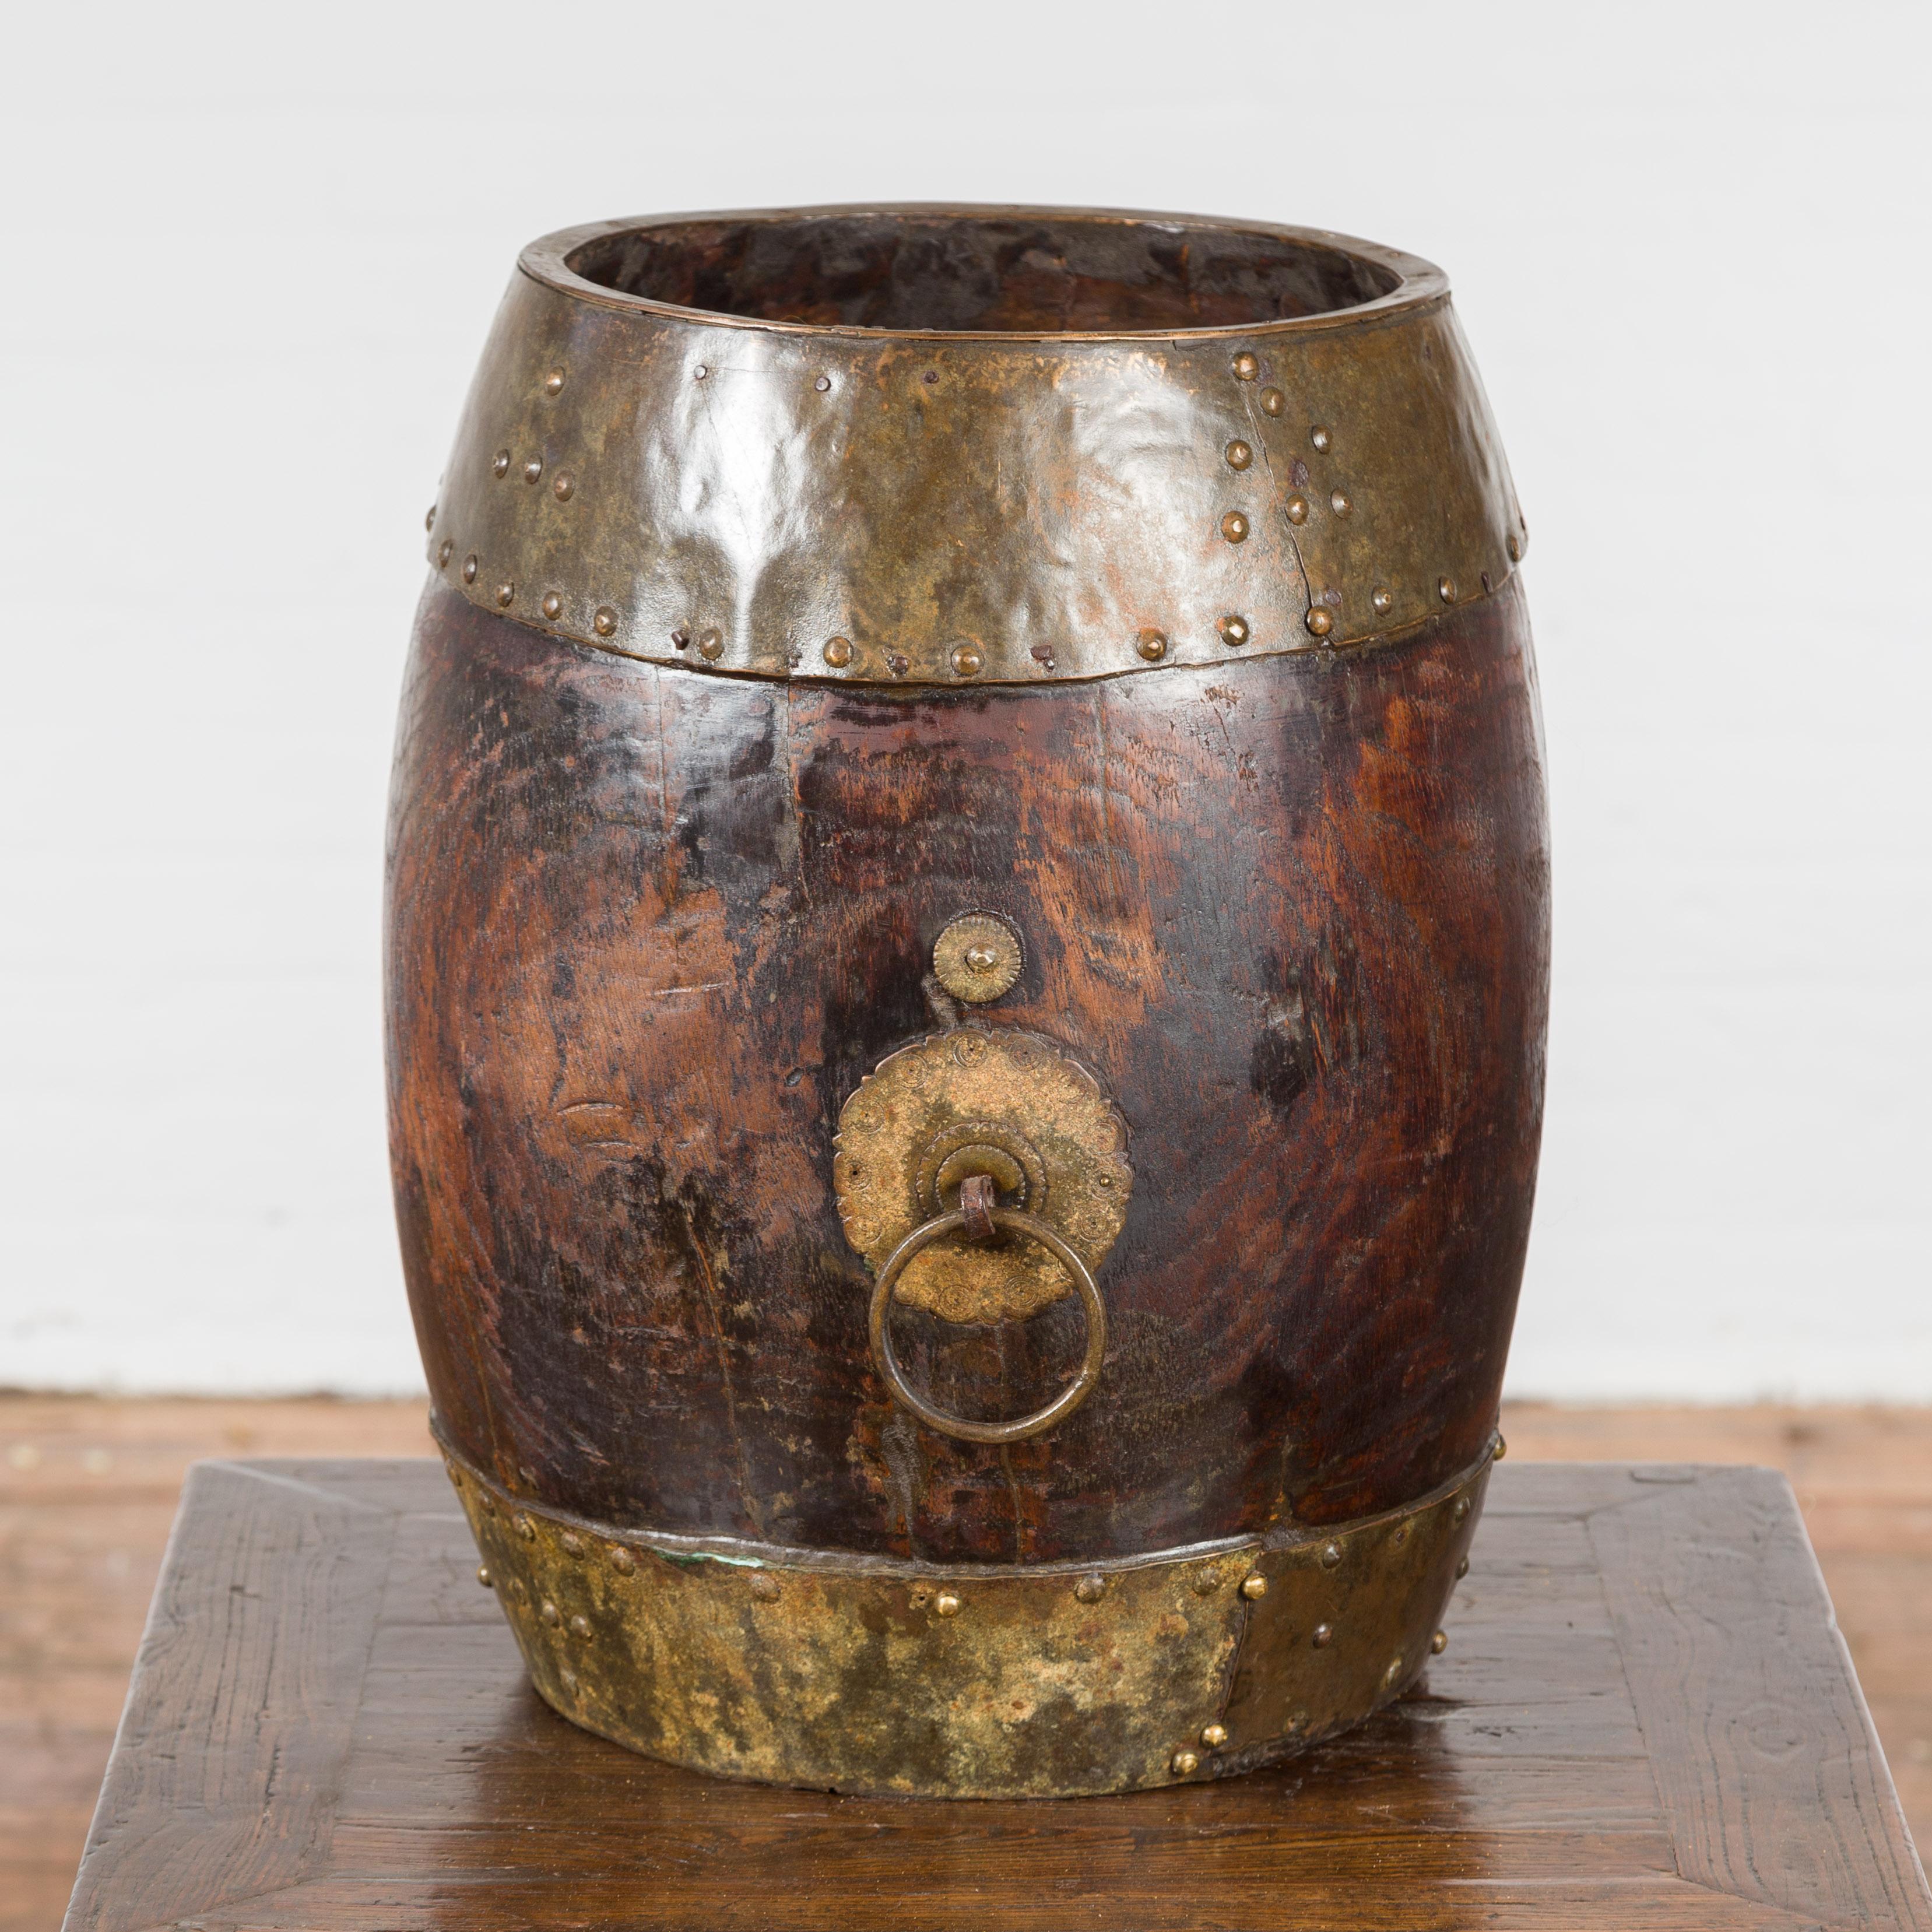 A Chinese vintage wooden bucket from the mid 20th century, with brass accents. Created in China during the midcentury period, this vintage bucket features a circular dark brown wooden body adorned with brass details and studs. Mixing rustic with the